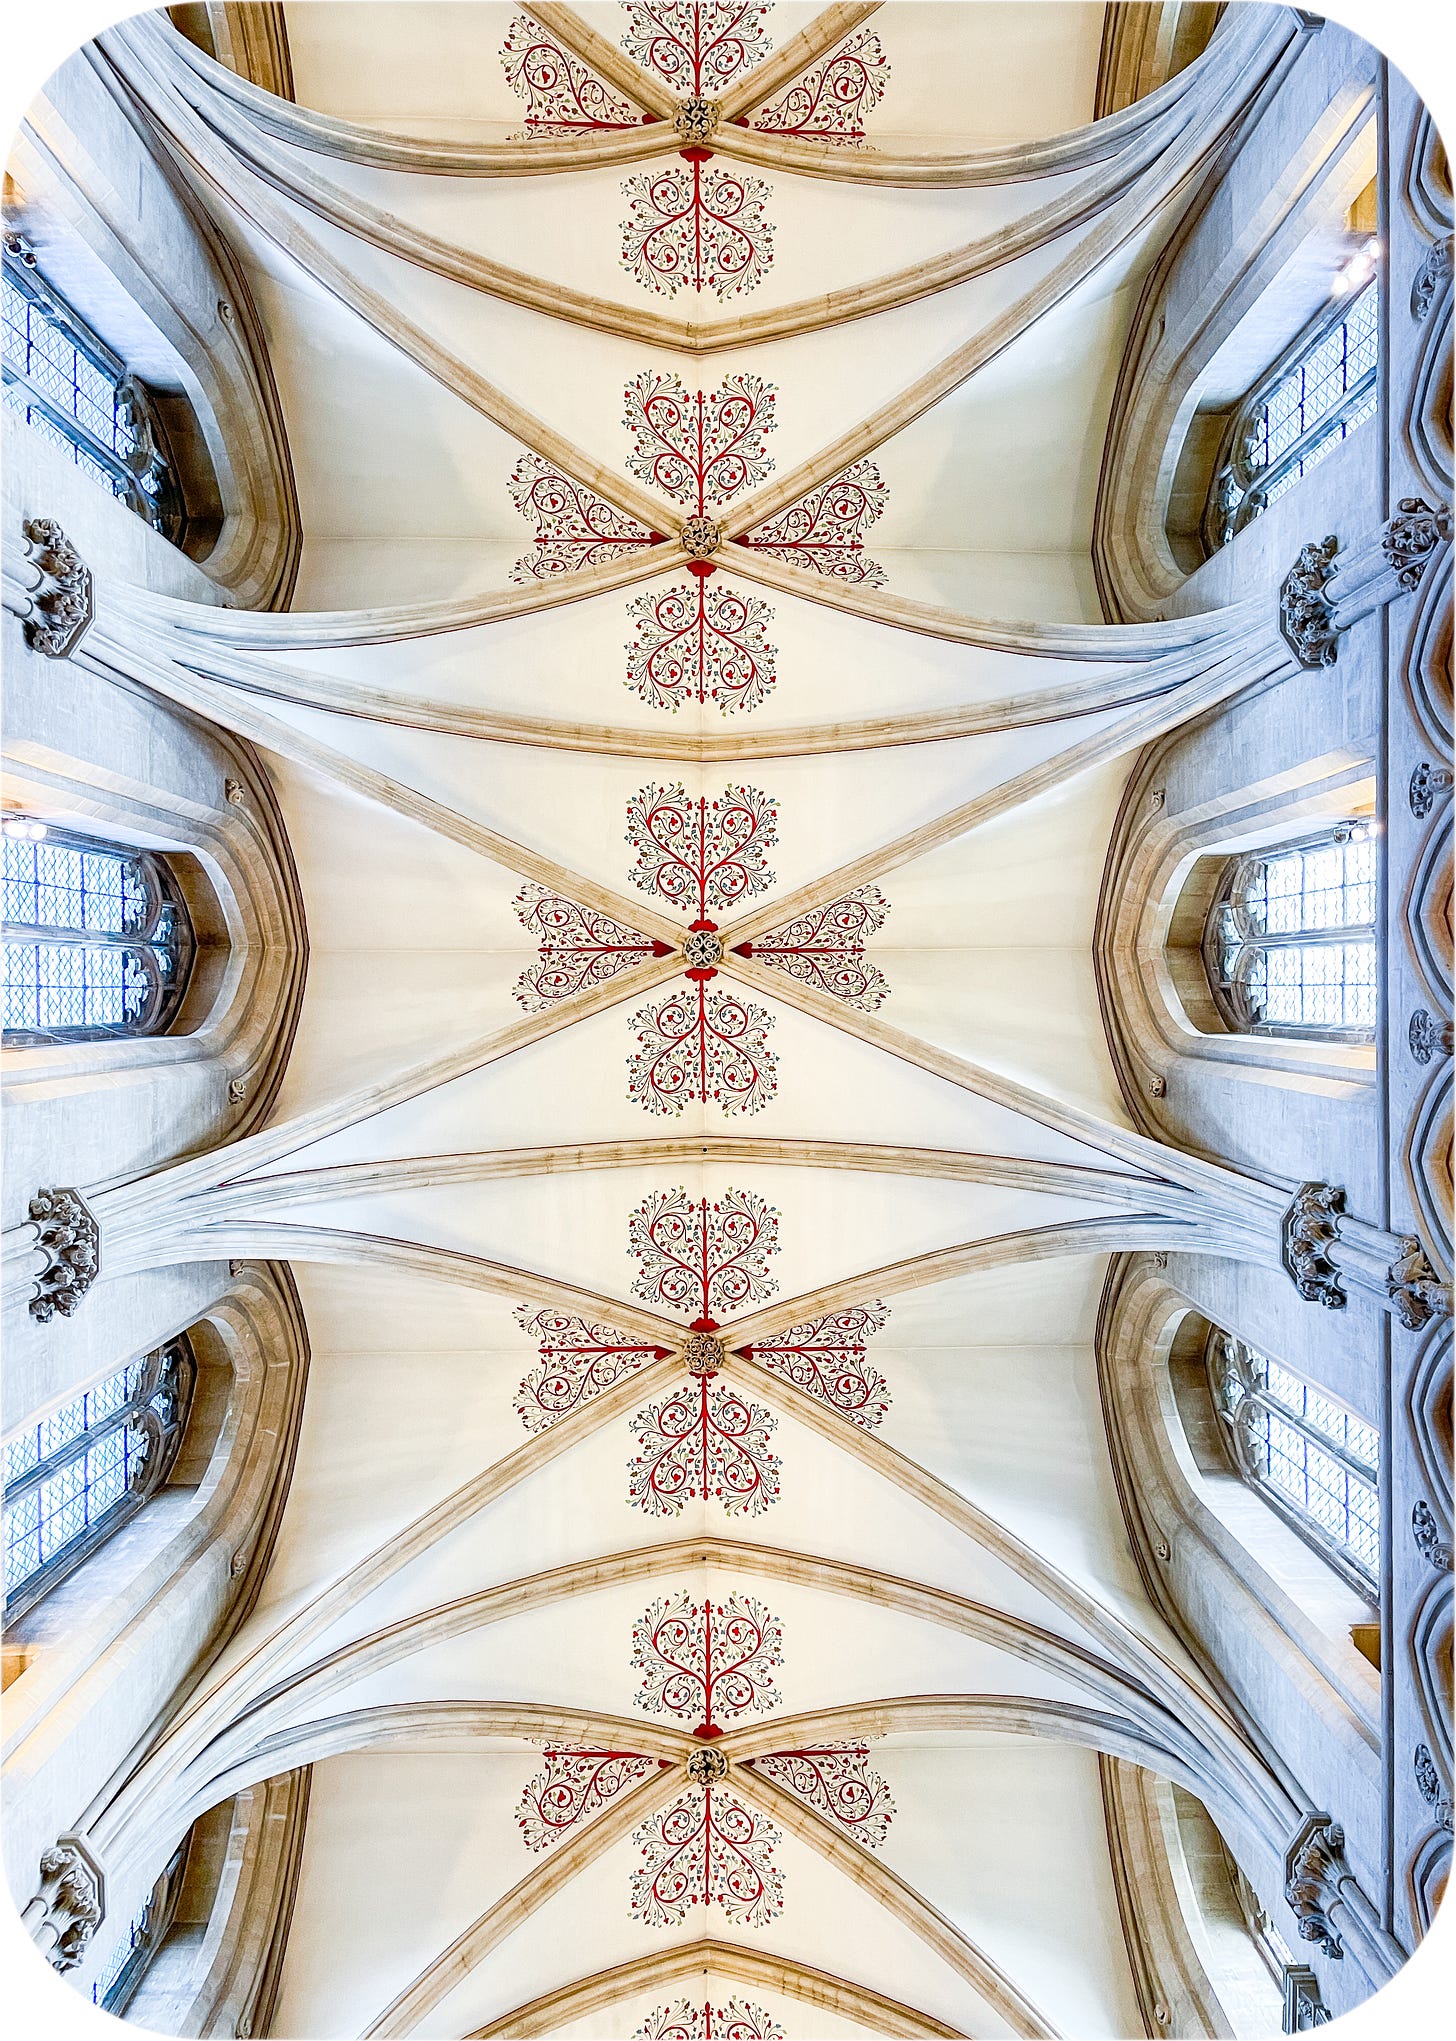 The ceiling of Wells Cathedral